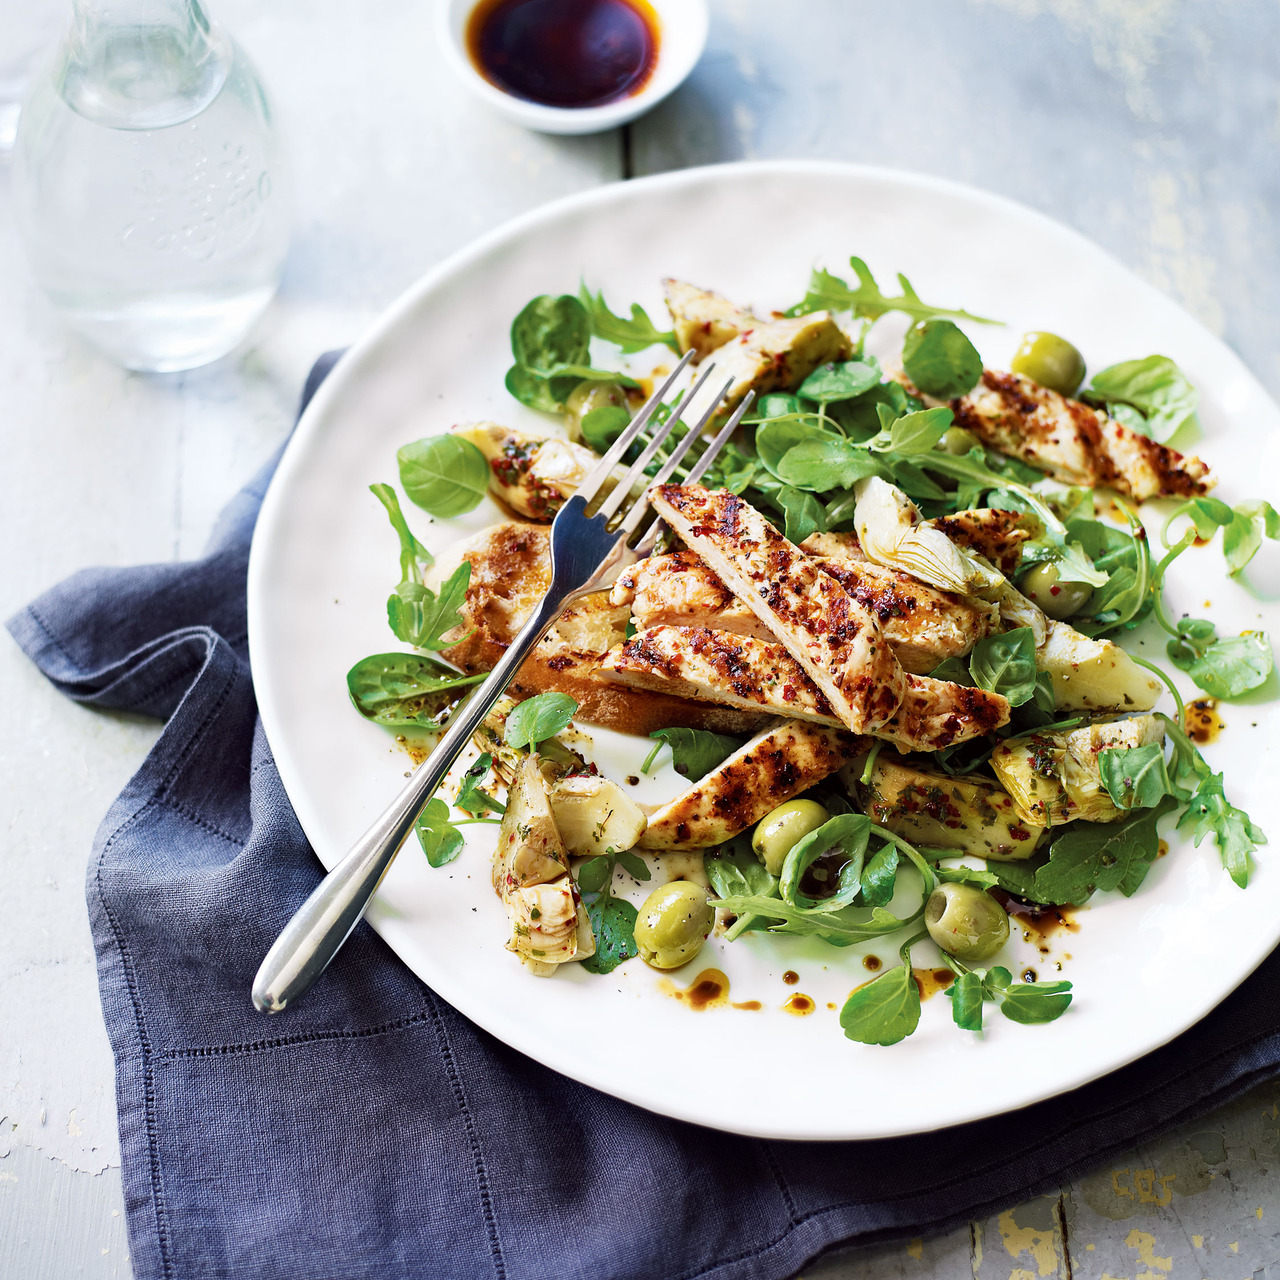 Spiced griddled chicken and antipasti salad | Cook With M&S